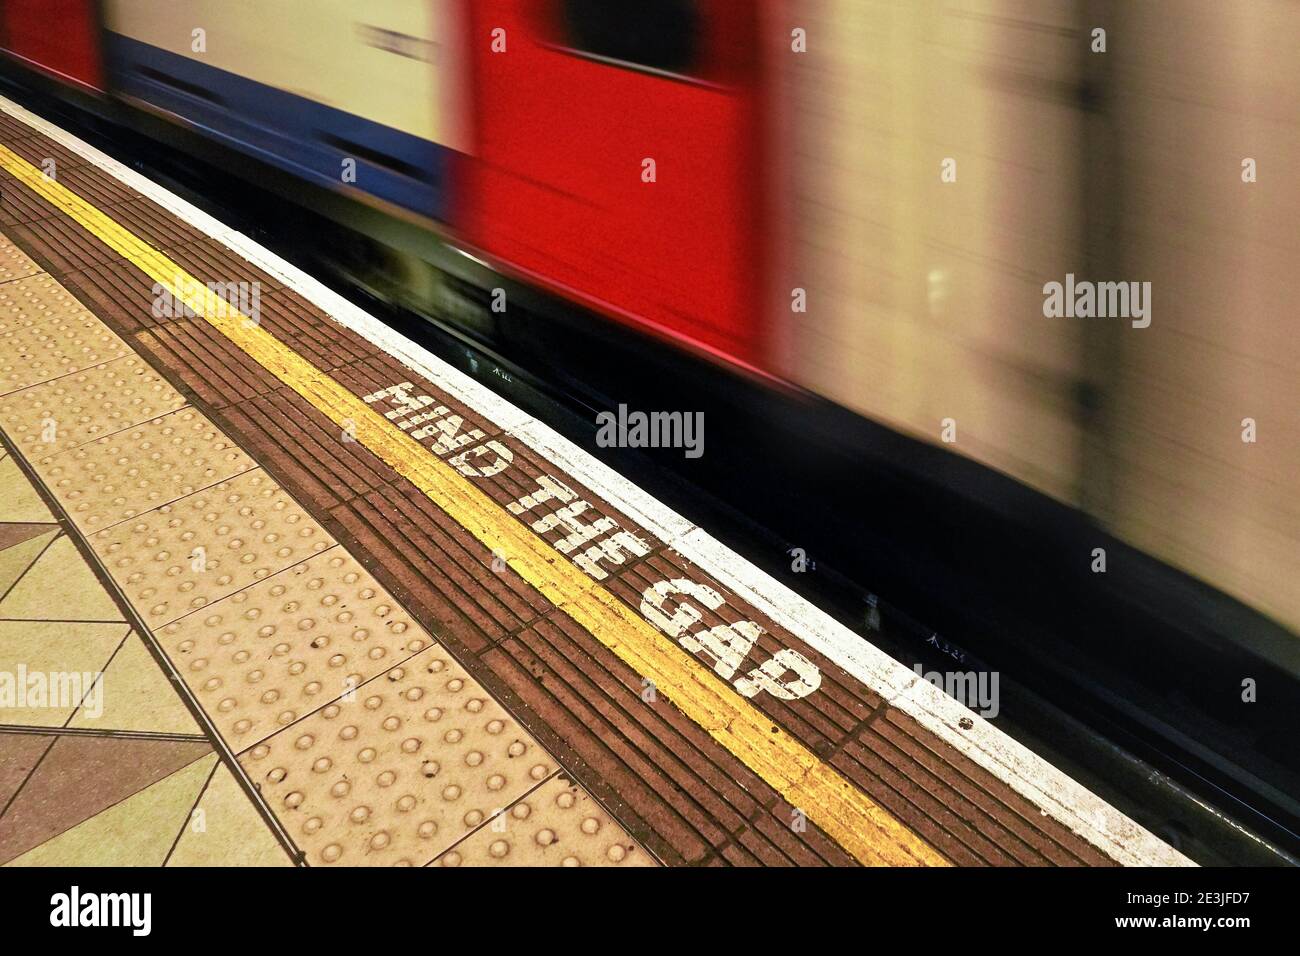 London, United Kingdom - February 02, 2019: MIND THE GAP text on floor of London underground station, blurred train arriving behind white line Stock Photo